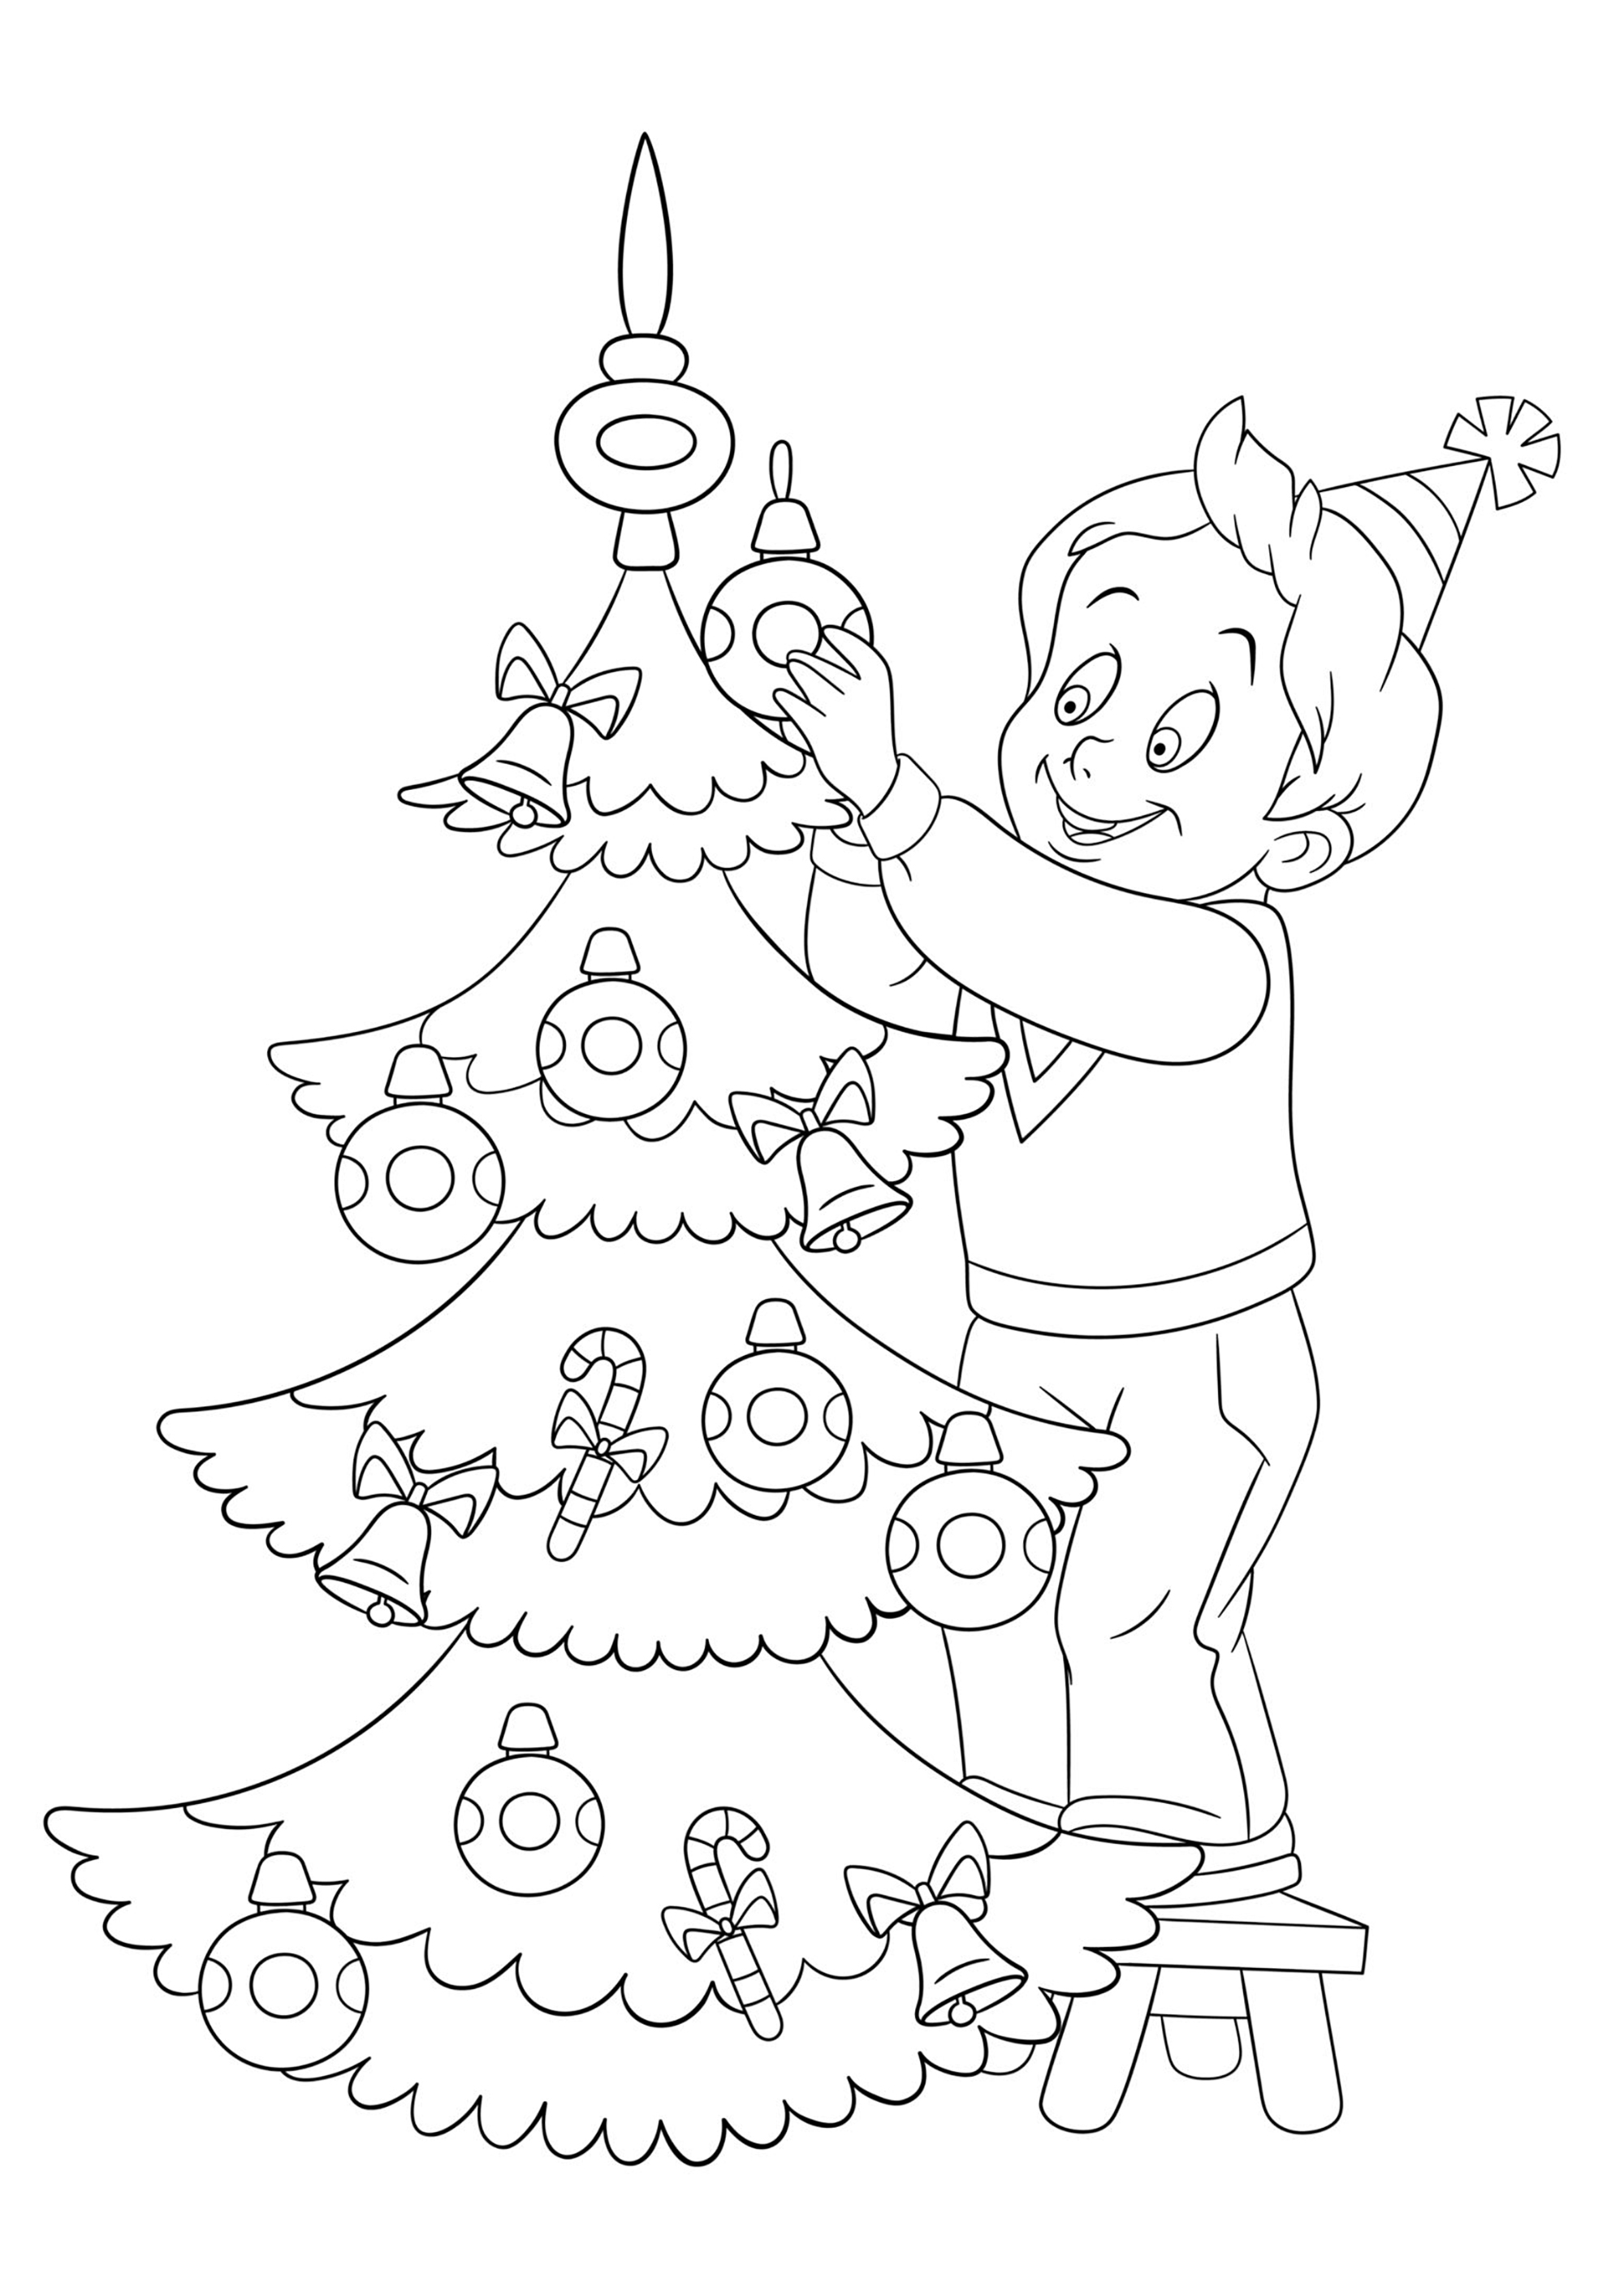 Christmas Tree Coloring Pages for Children